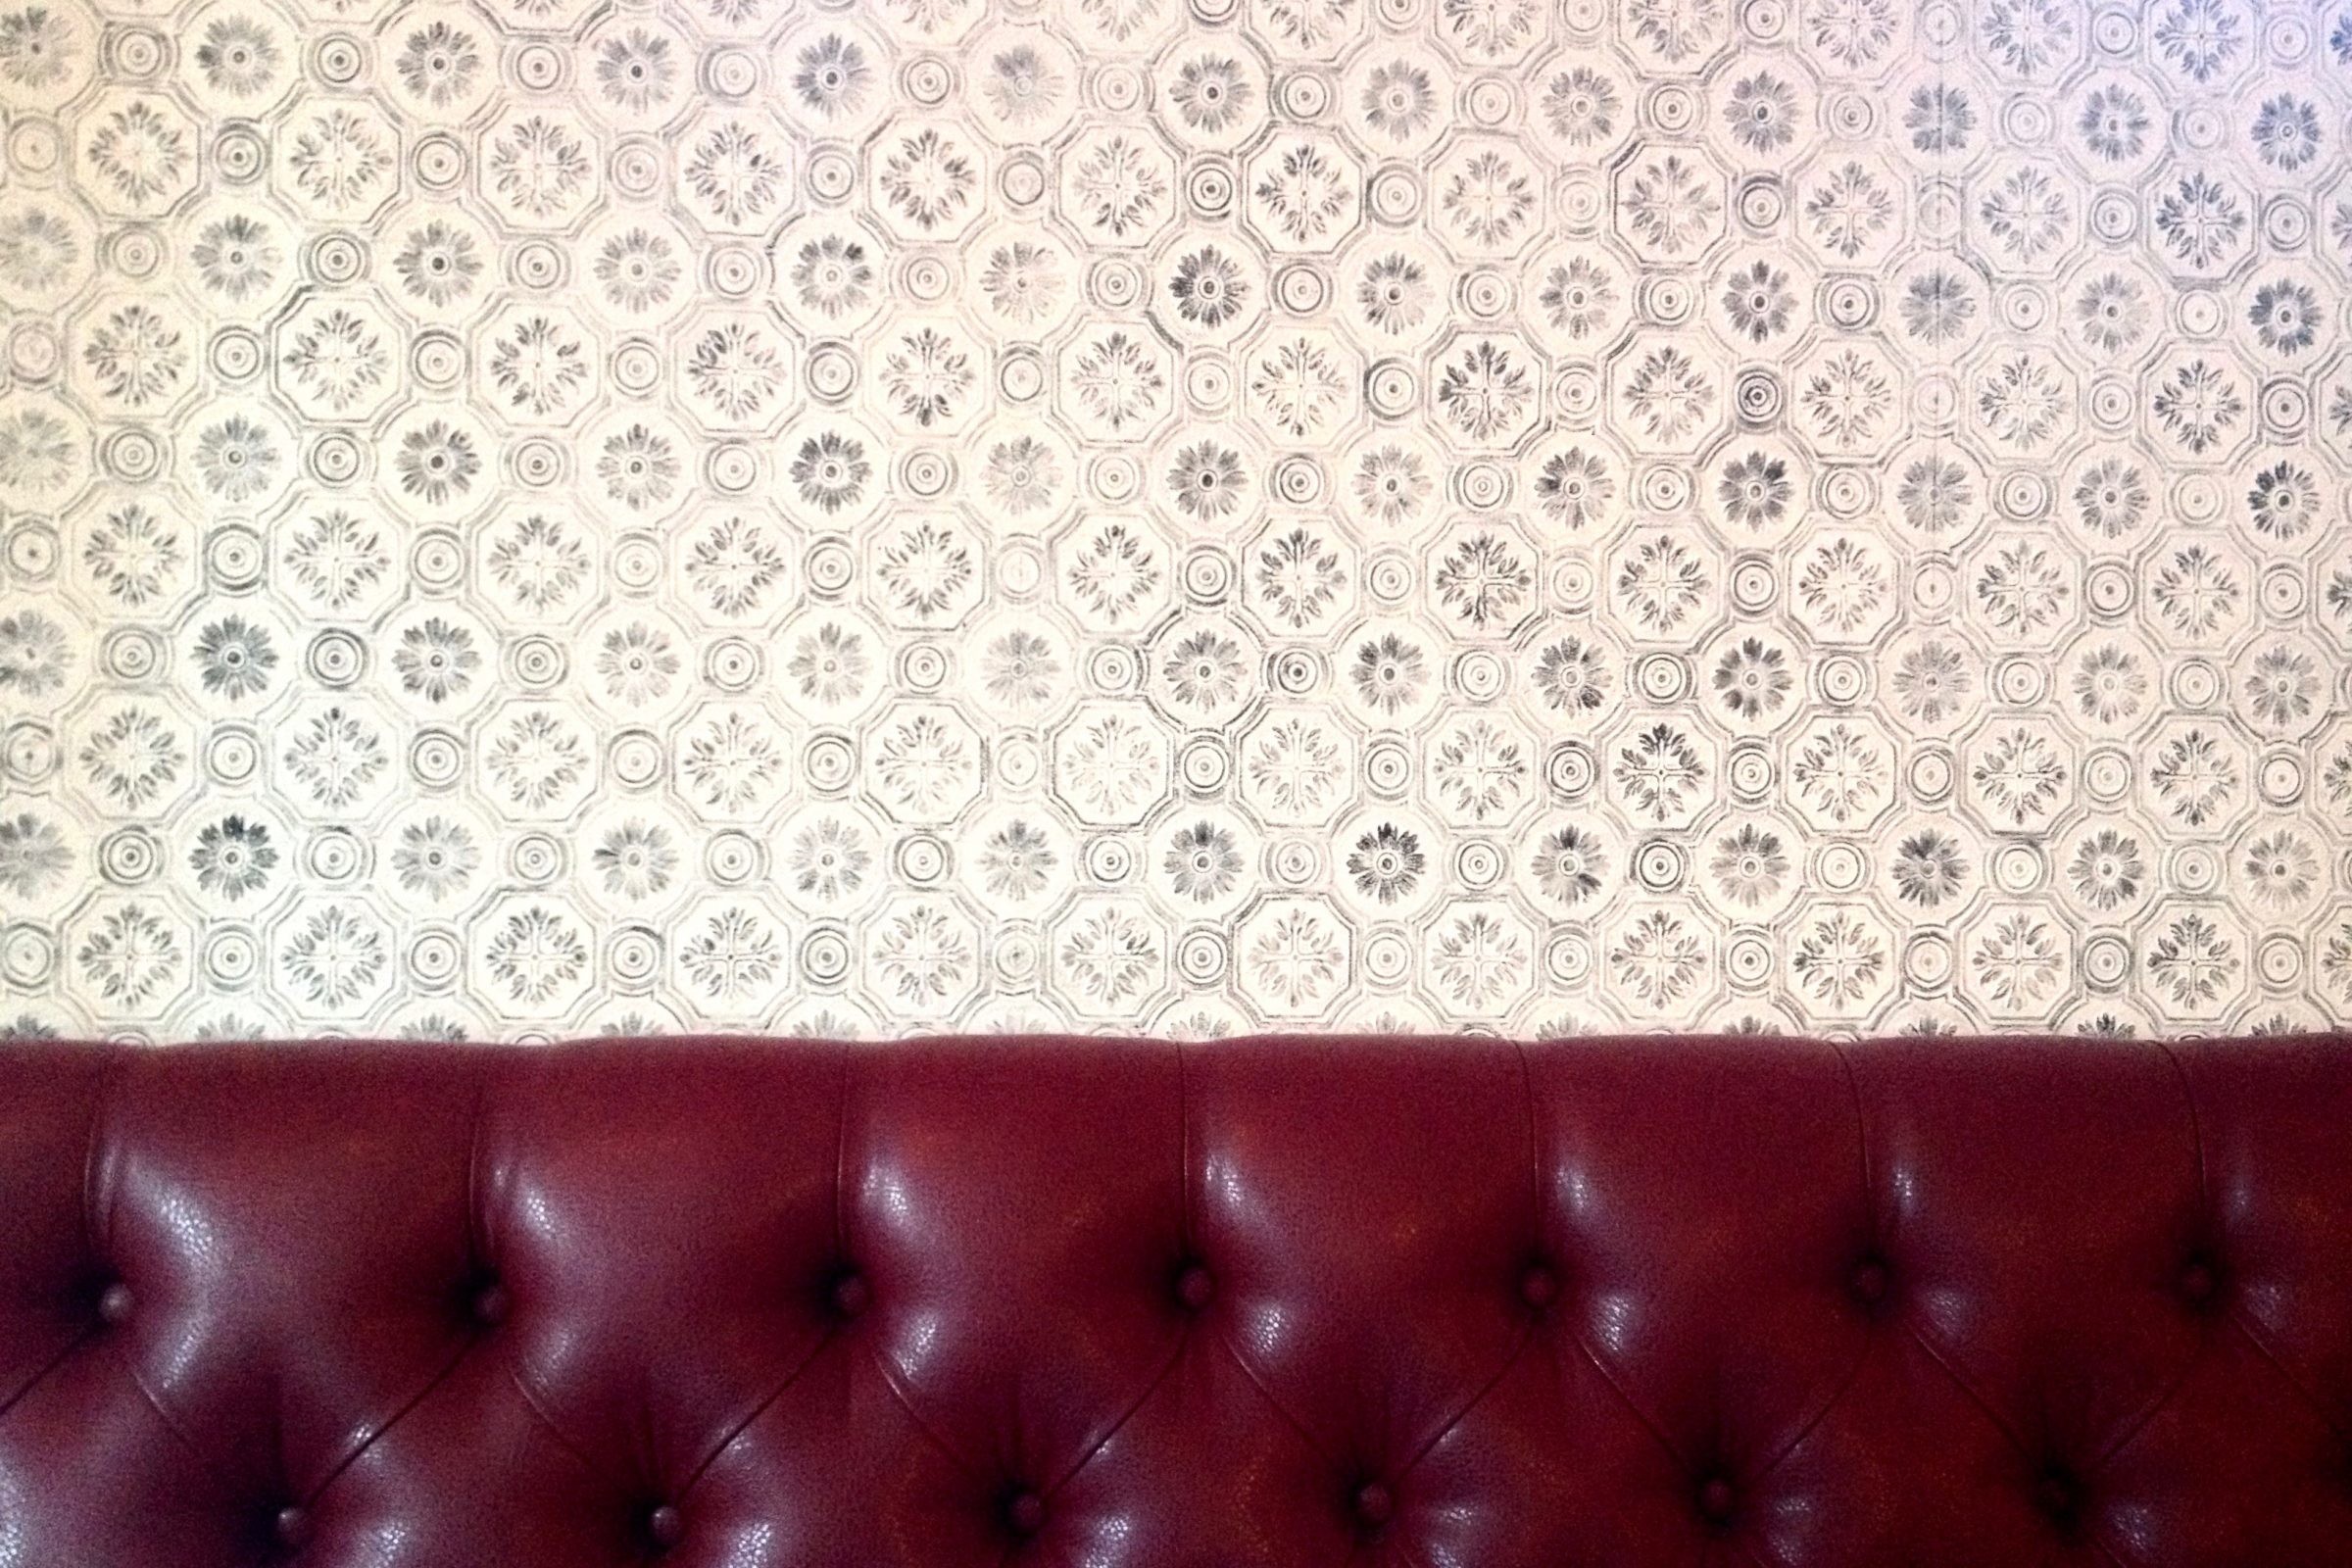 2400x1600 Red Vinyl Seat on Patterned Wallpaper